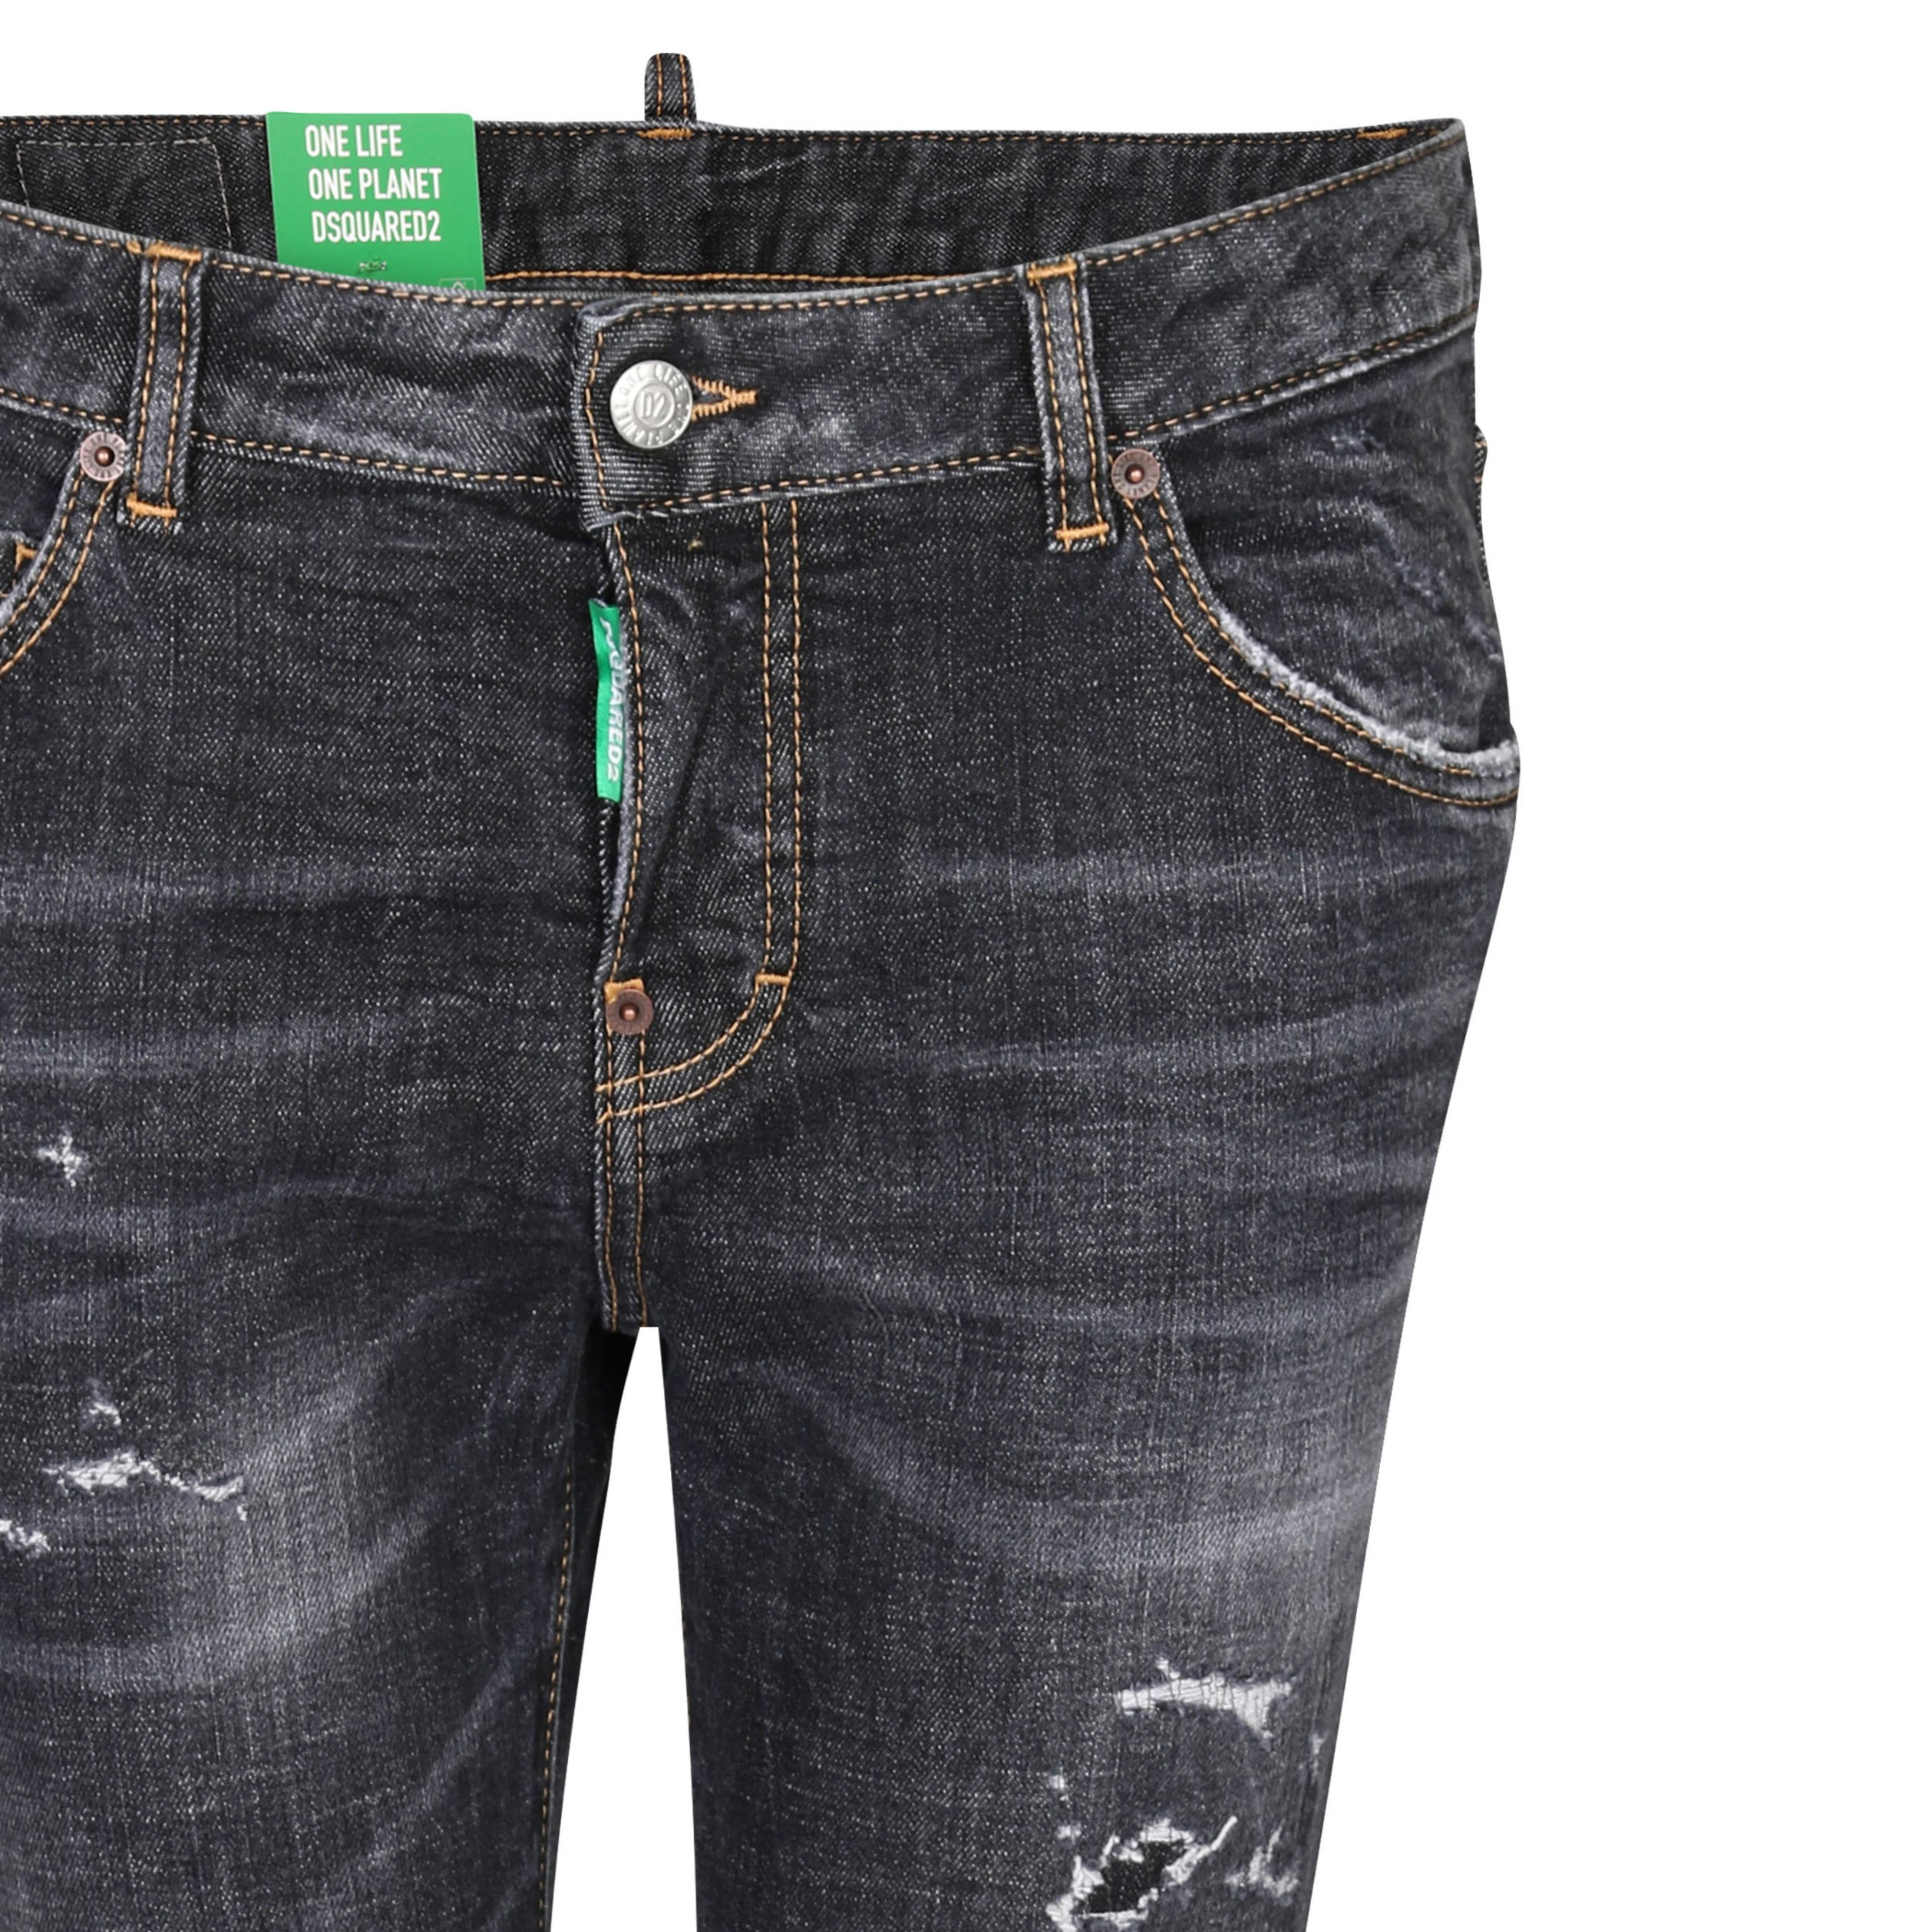 DSQUARED2 Green Label Cool Girl Jeans in Washed Black IT 36 / DE 30